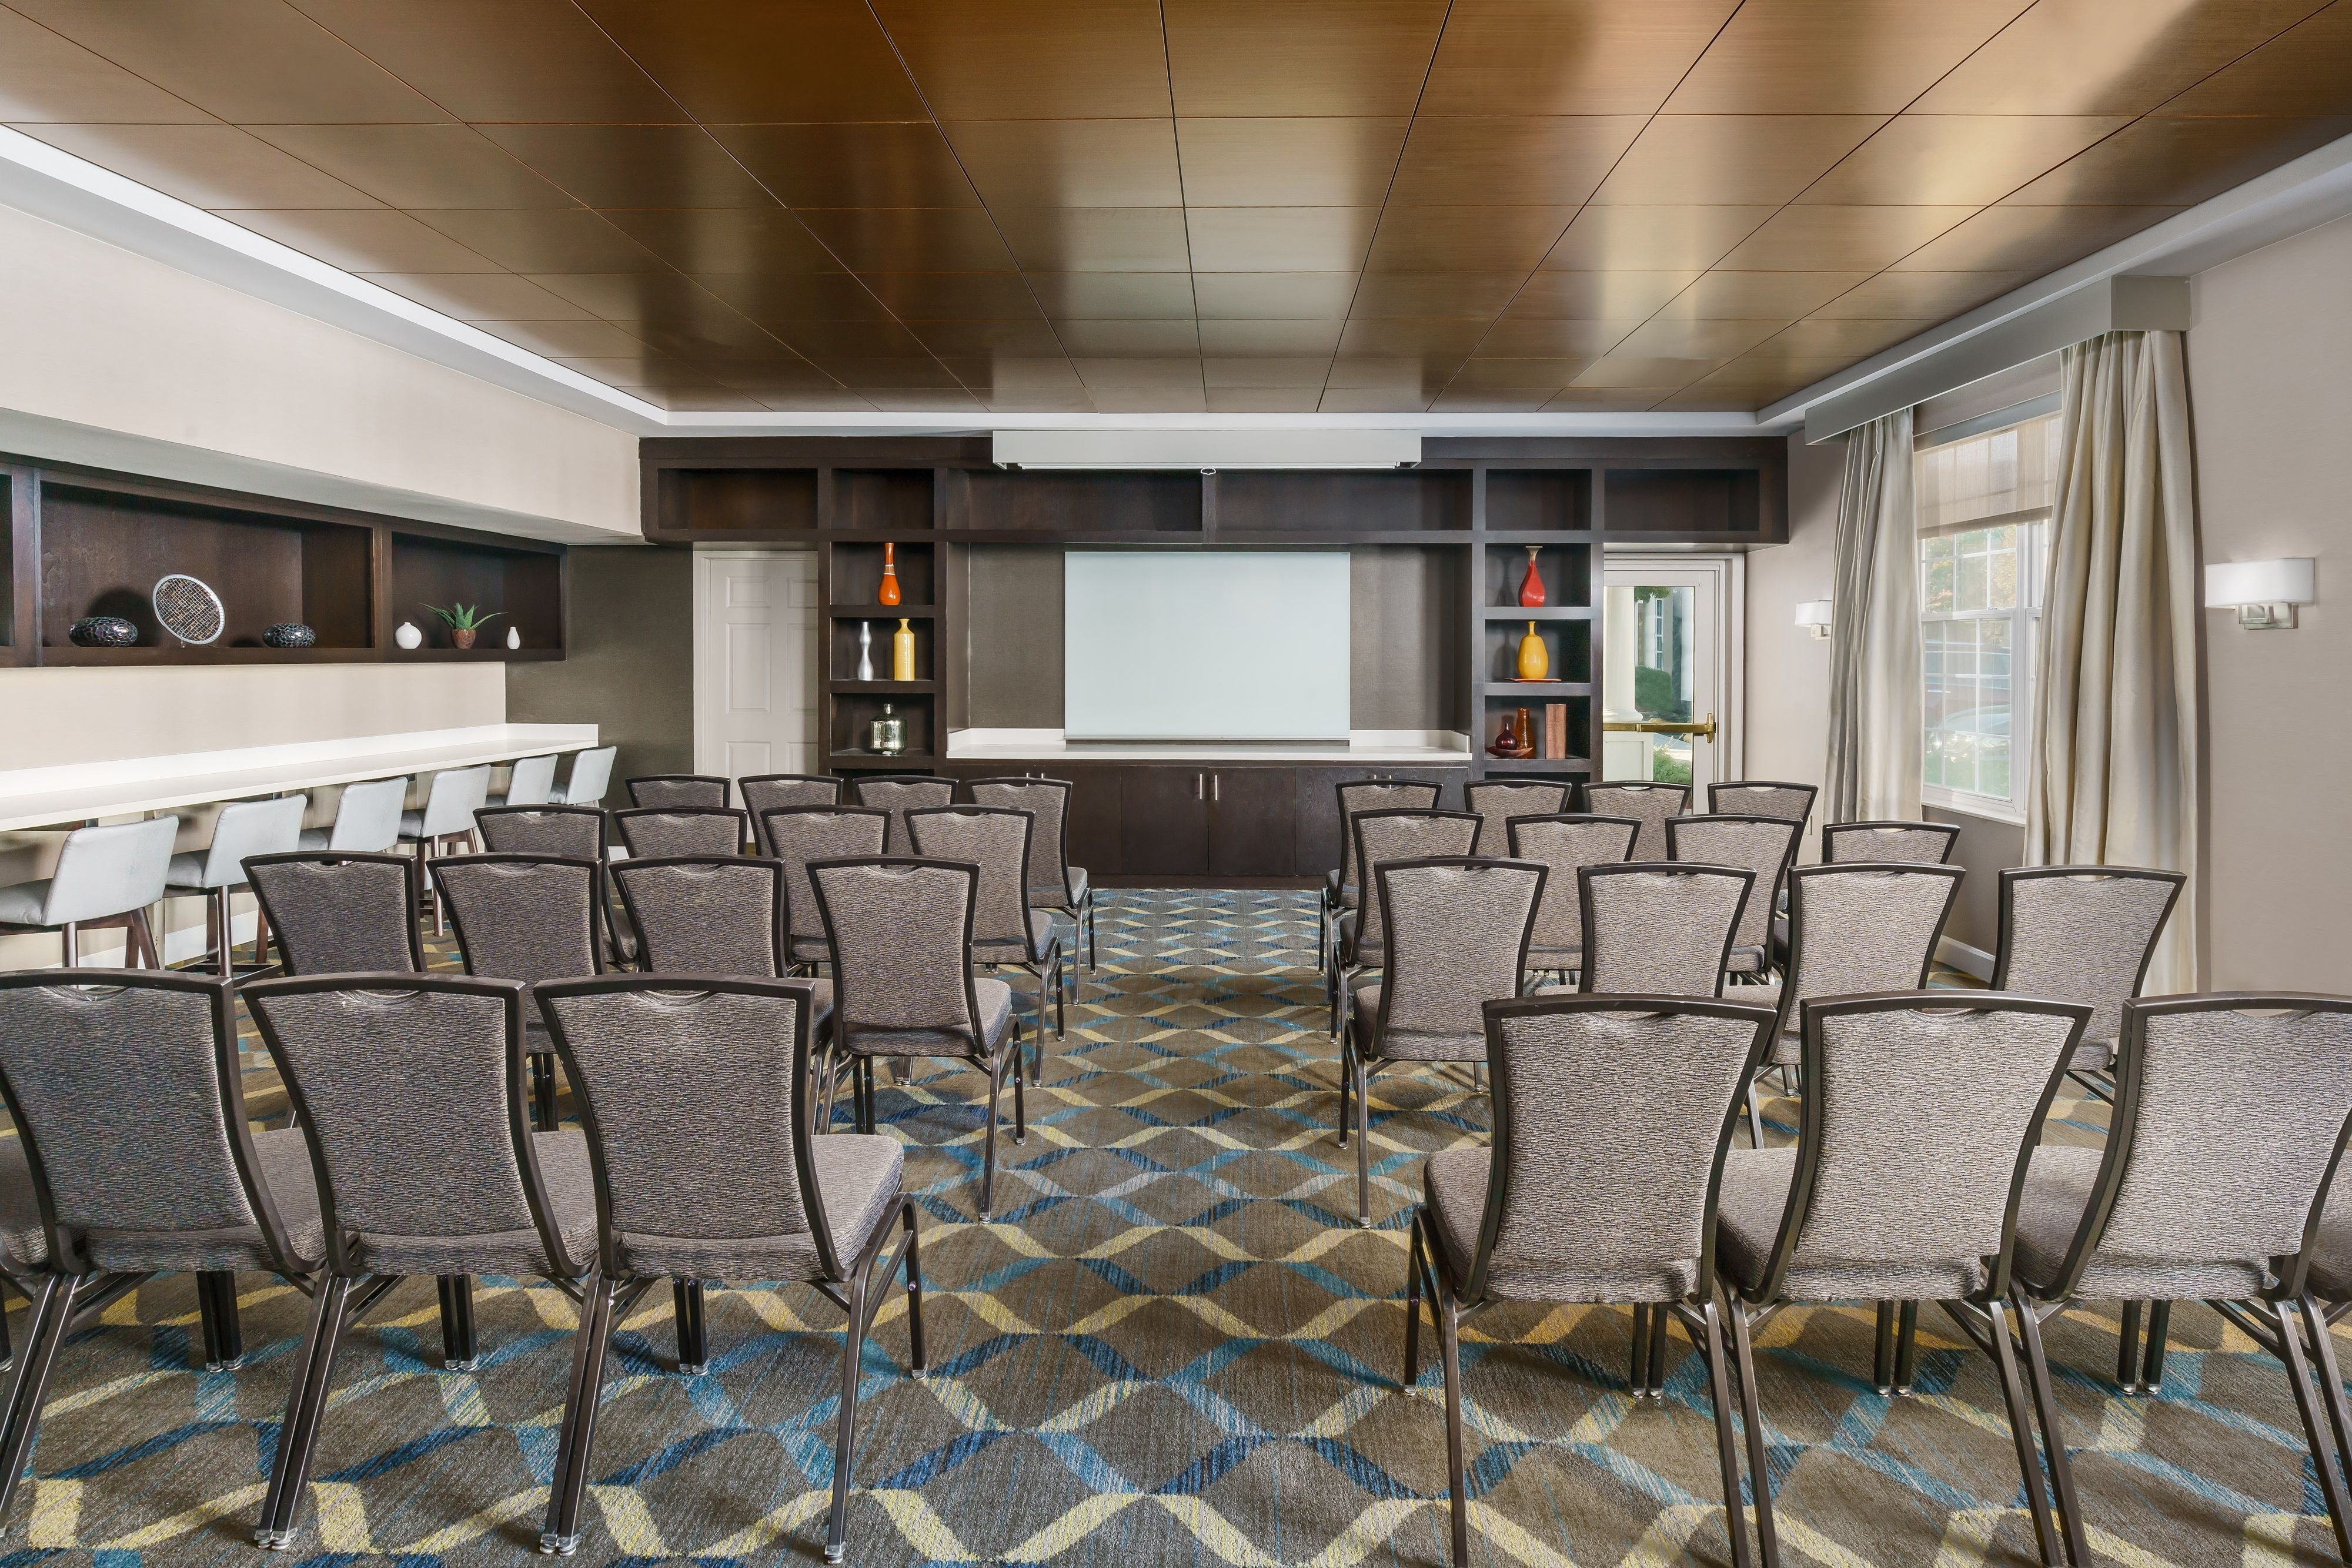 Meeting Room Theater